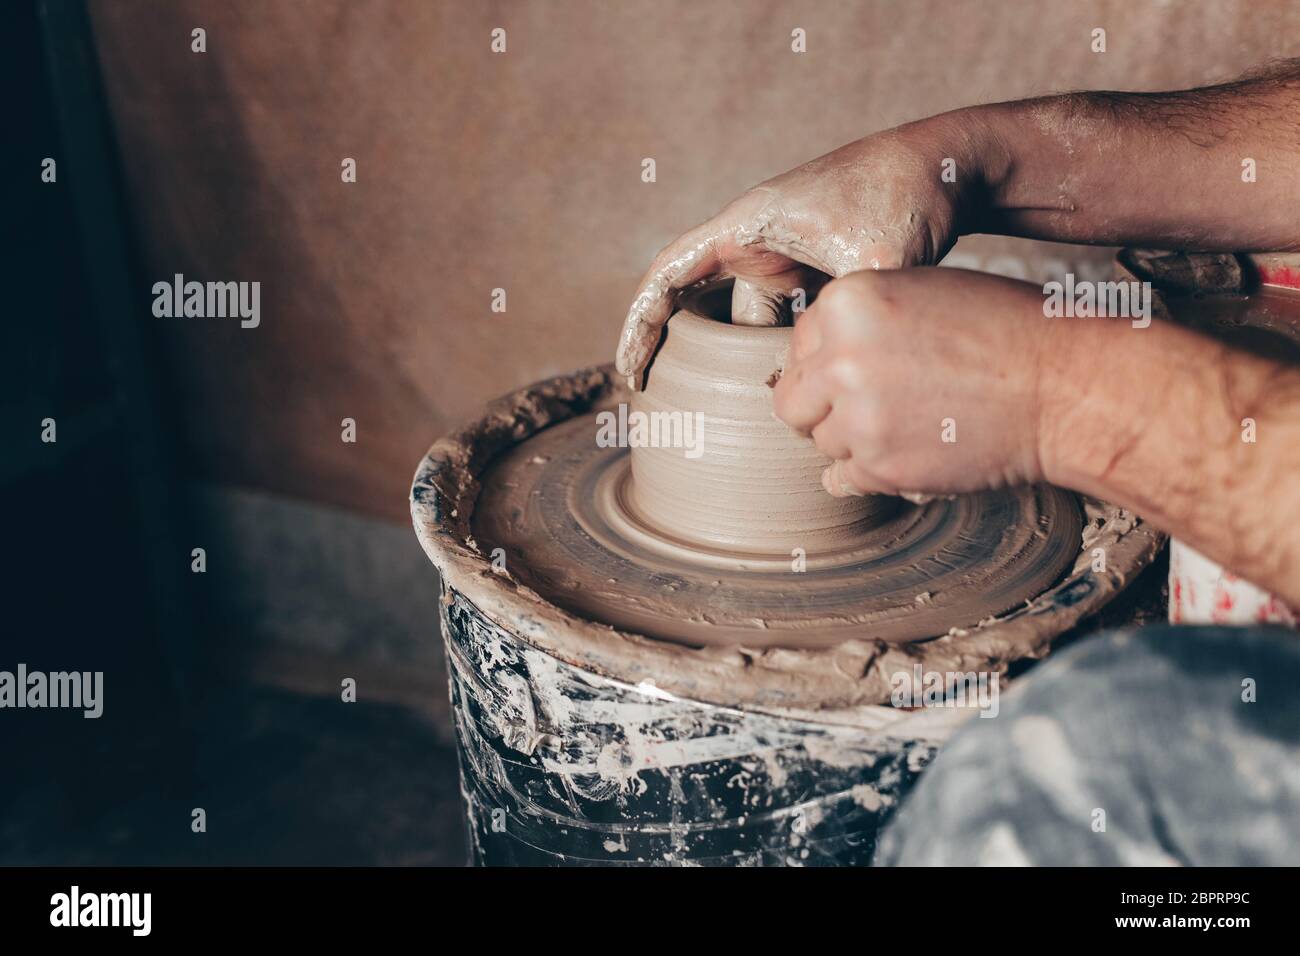 Man forms a white clay product on a pottery wheel Stock Photo